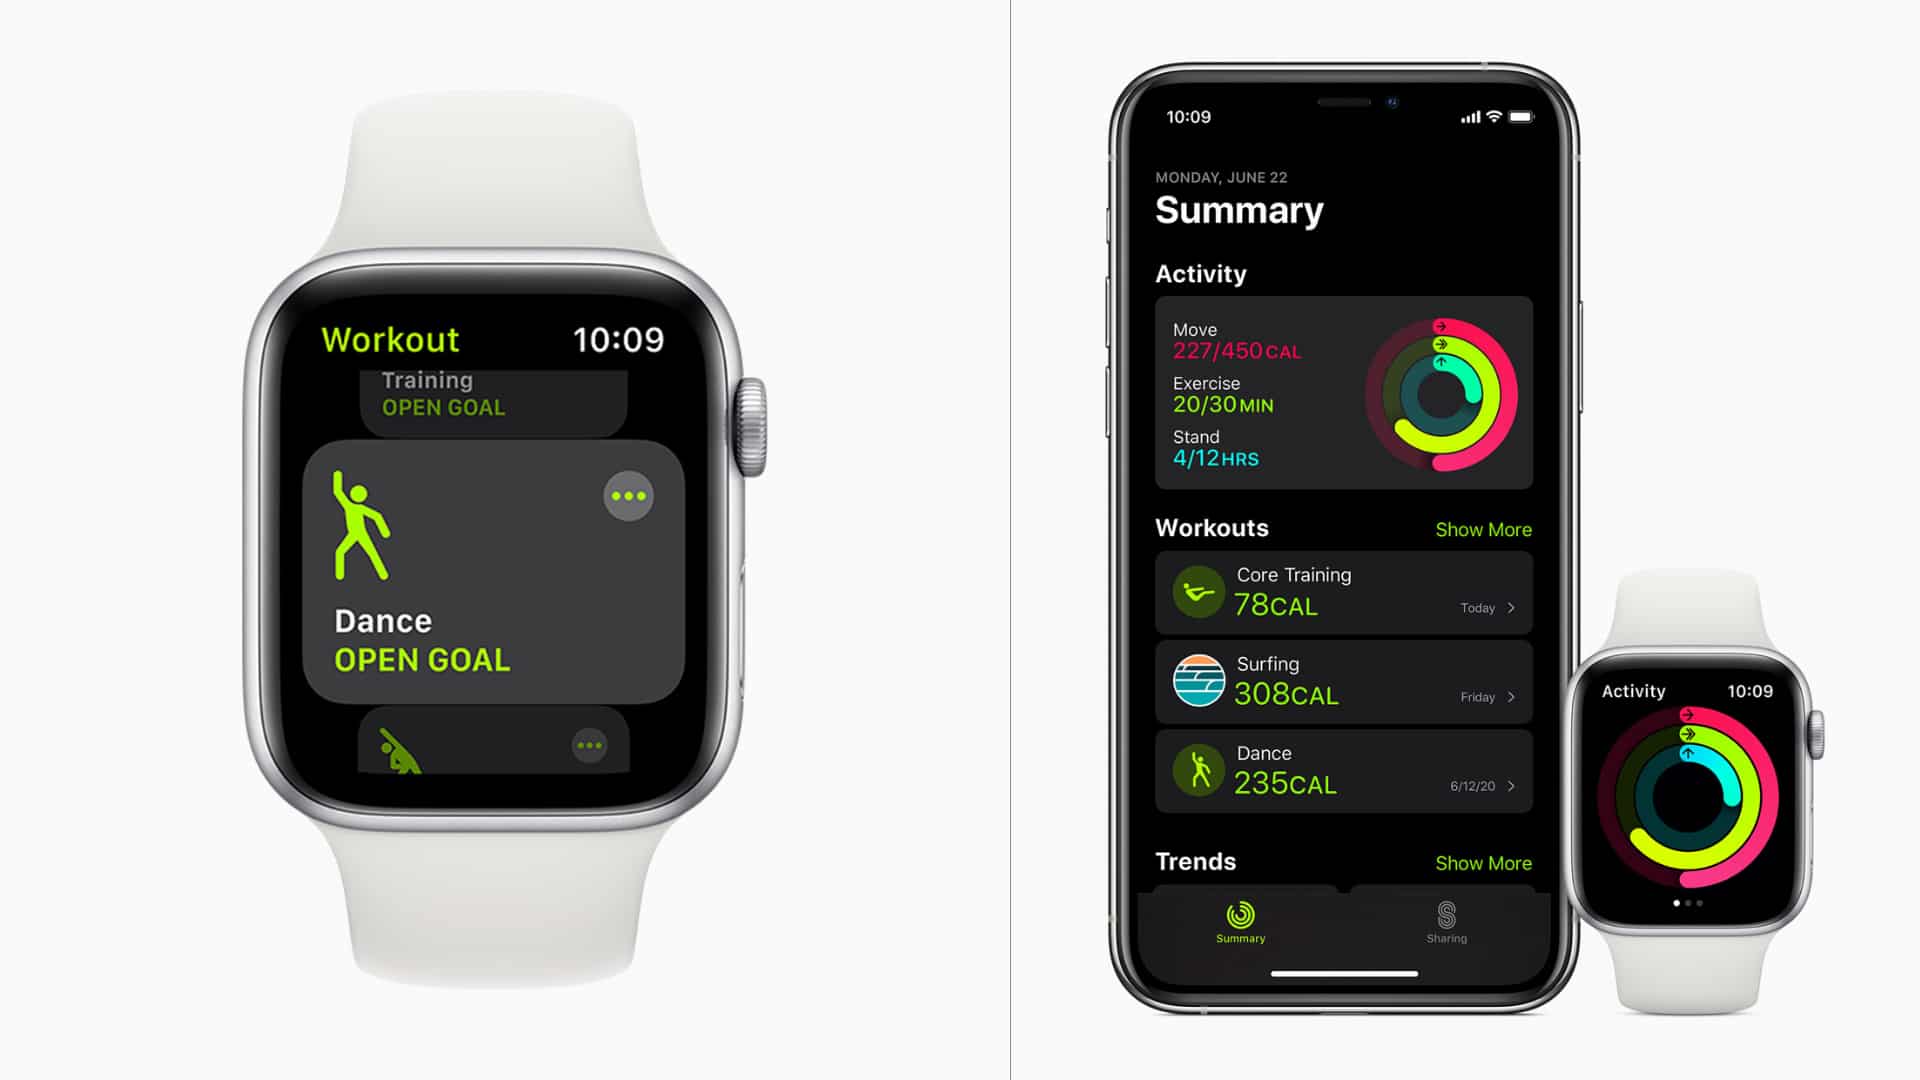 5 New watchOS 7 Features You've Been Waiting For